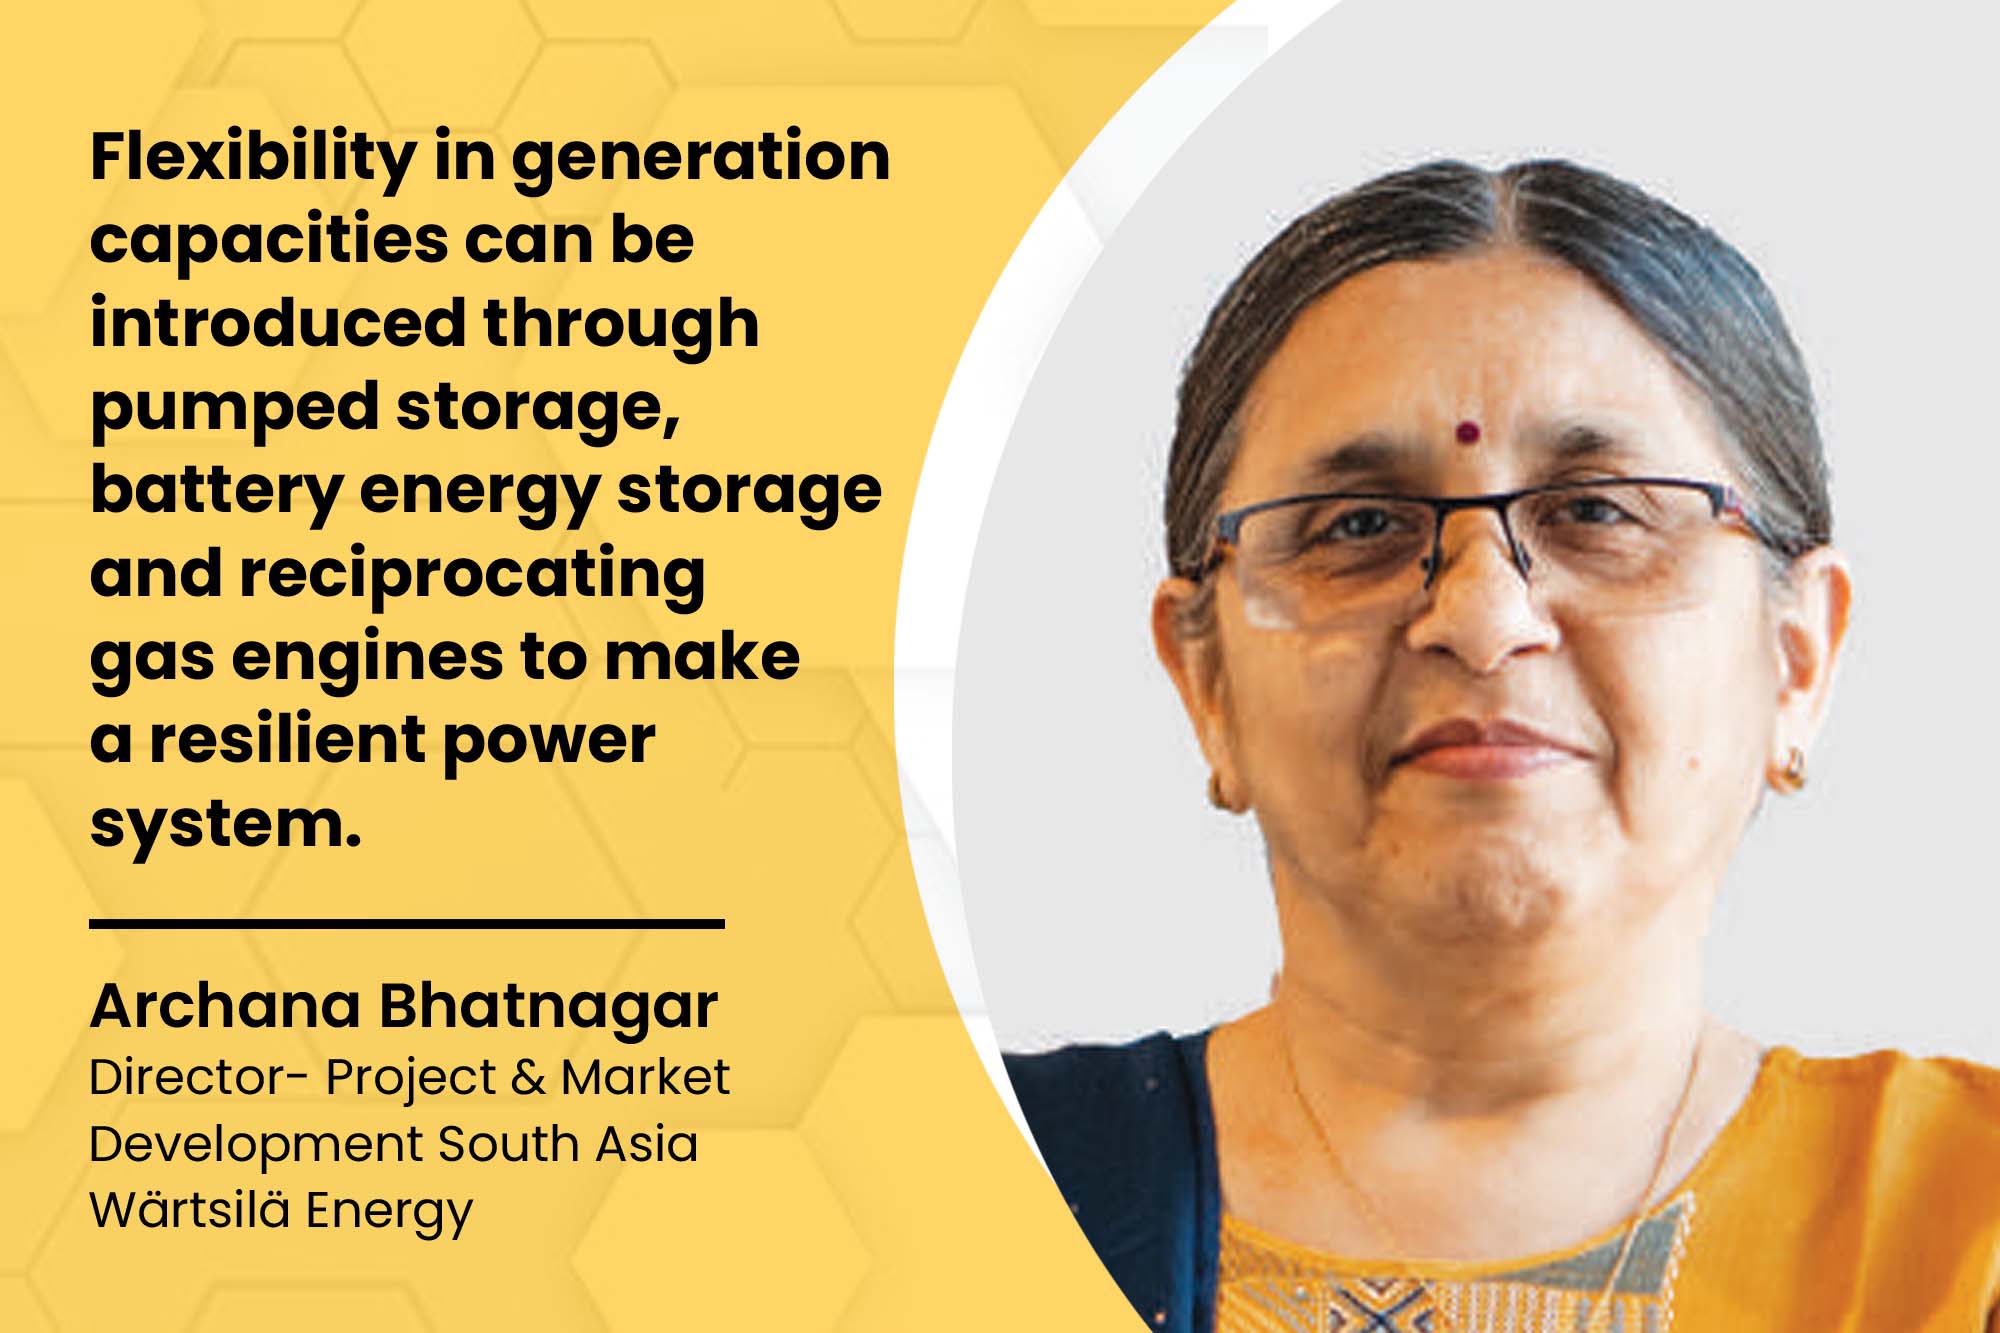 We must boost power system flexibility to achieve 500 GW of non-fossil energy by 2030